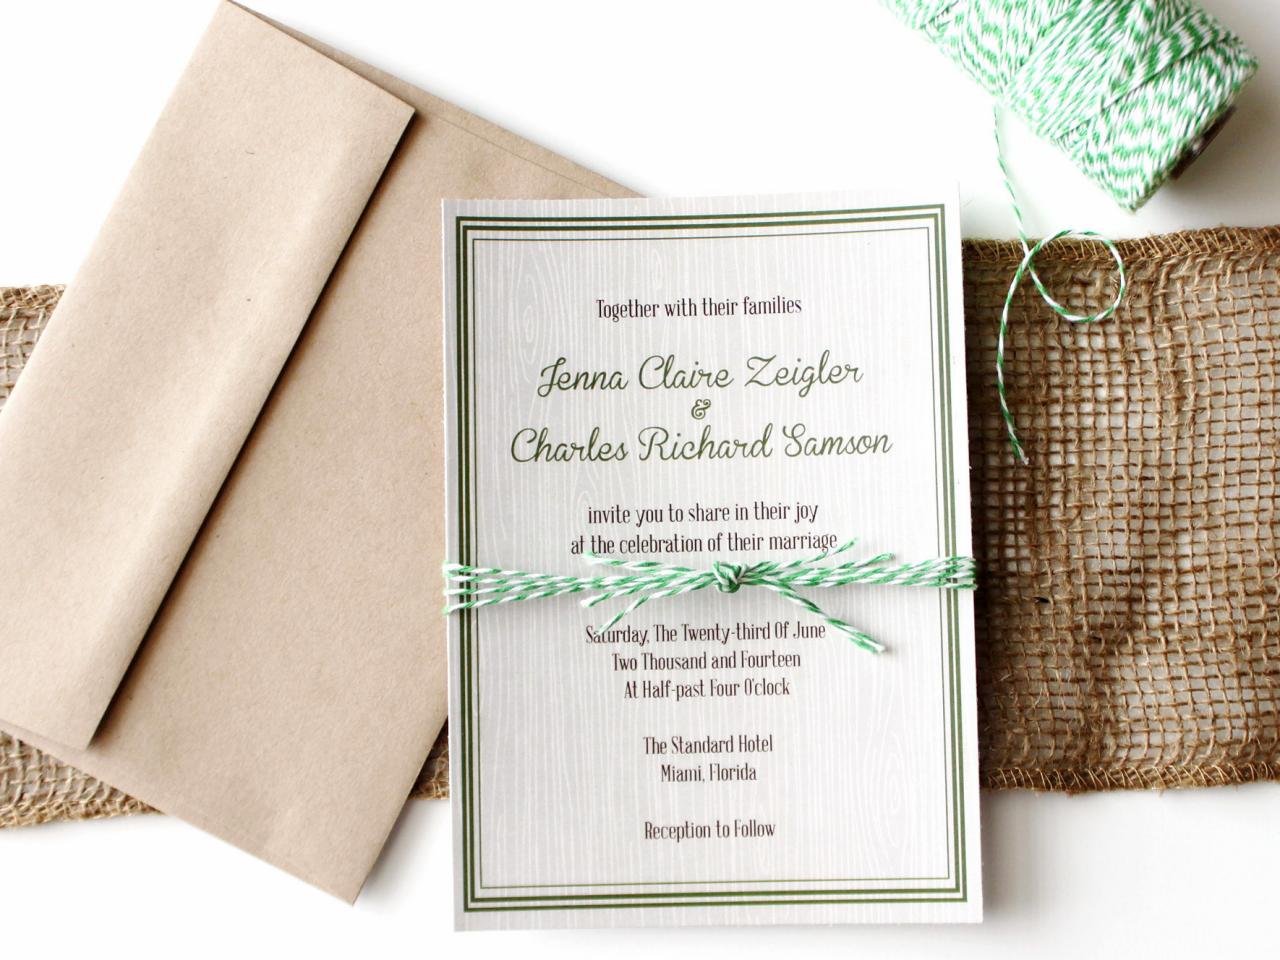 Save The Date And Save Money With Free Printable Wedding Invites Diy Network Blog Made Remade Diy